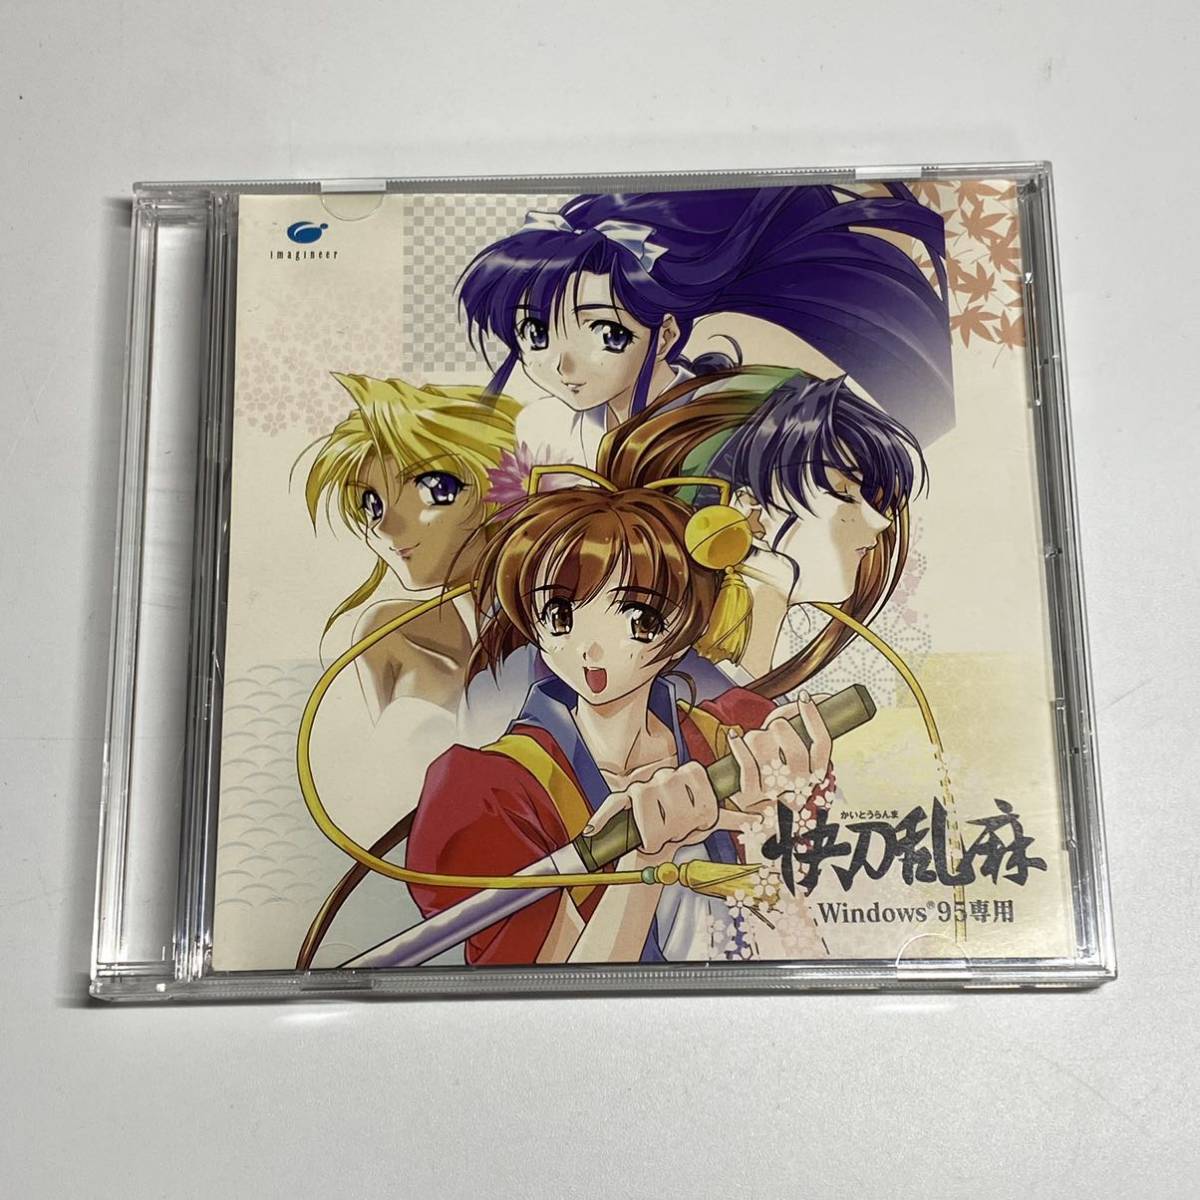 Windows95 CD soft . sword . flax .... Ranma anime rare rare records out of production out of print CD-ROM